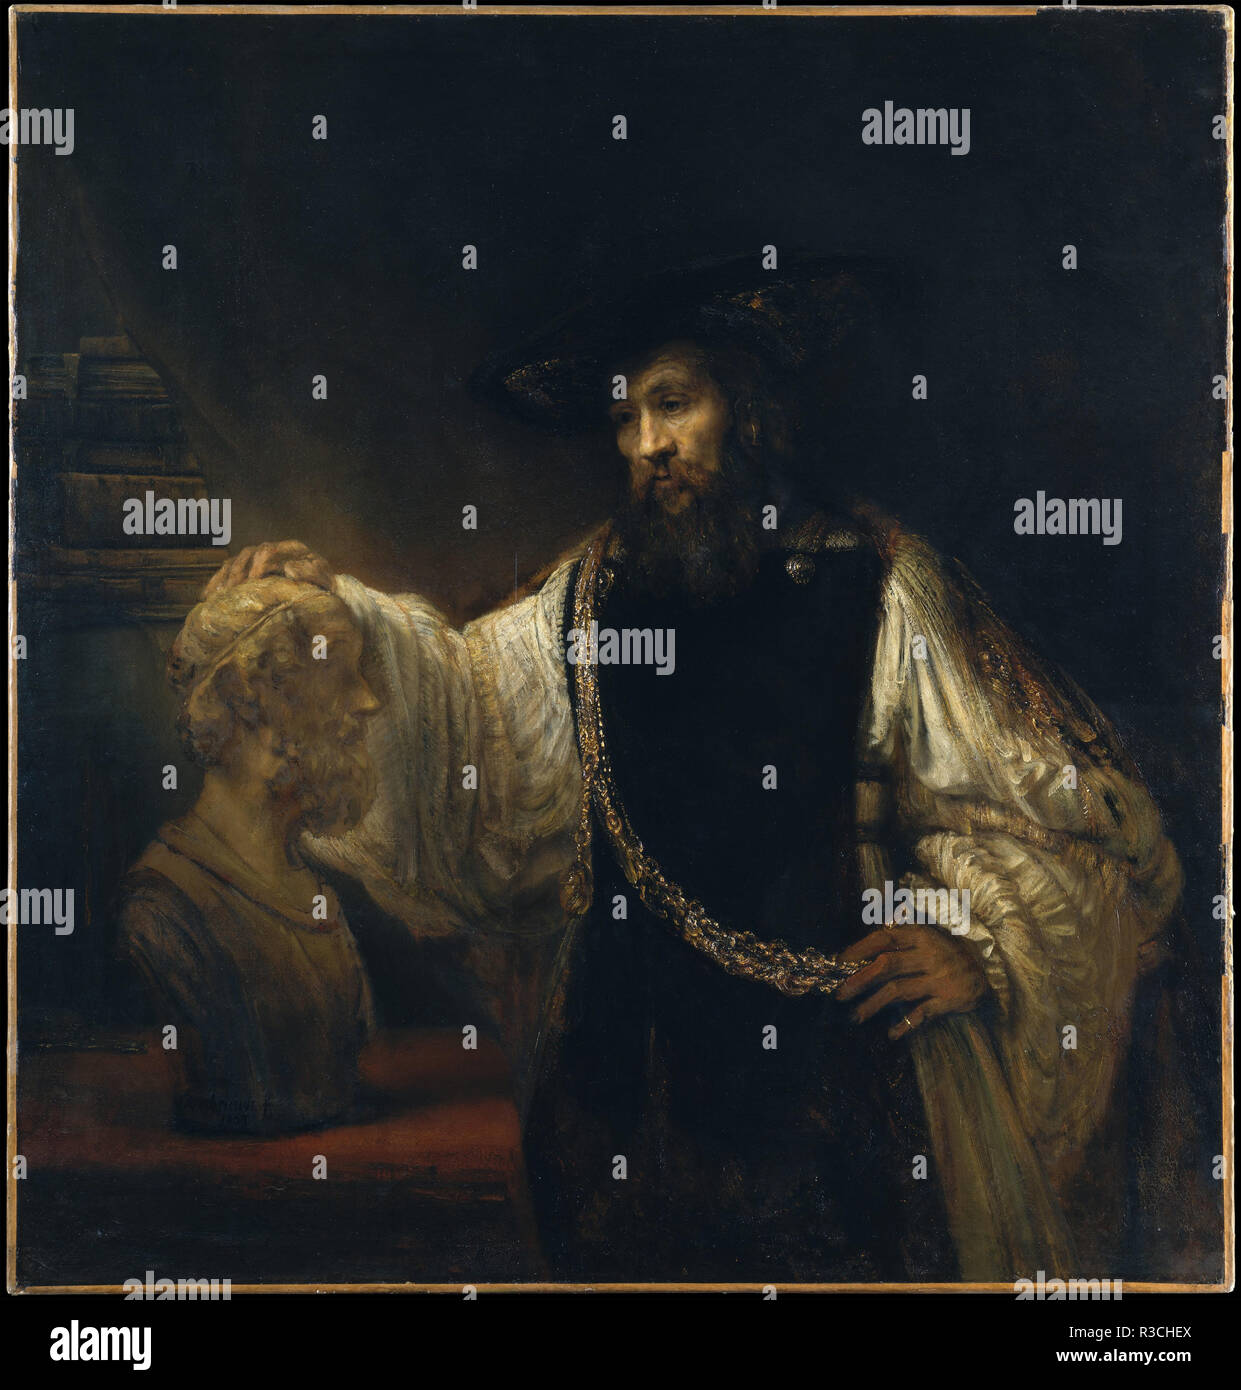 Aristotle with a Bust of Homer. Date/Period: 1653. Painting. Oil on canvas. Height: 143.5 cm (56.4 in); Width: 136.5 cm (53.7 in). Author: REMBRANDT, HARMENSZOON VAN RIJN. Rembrandt van Rhijn. Stock Photo